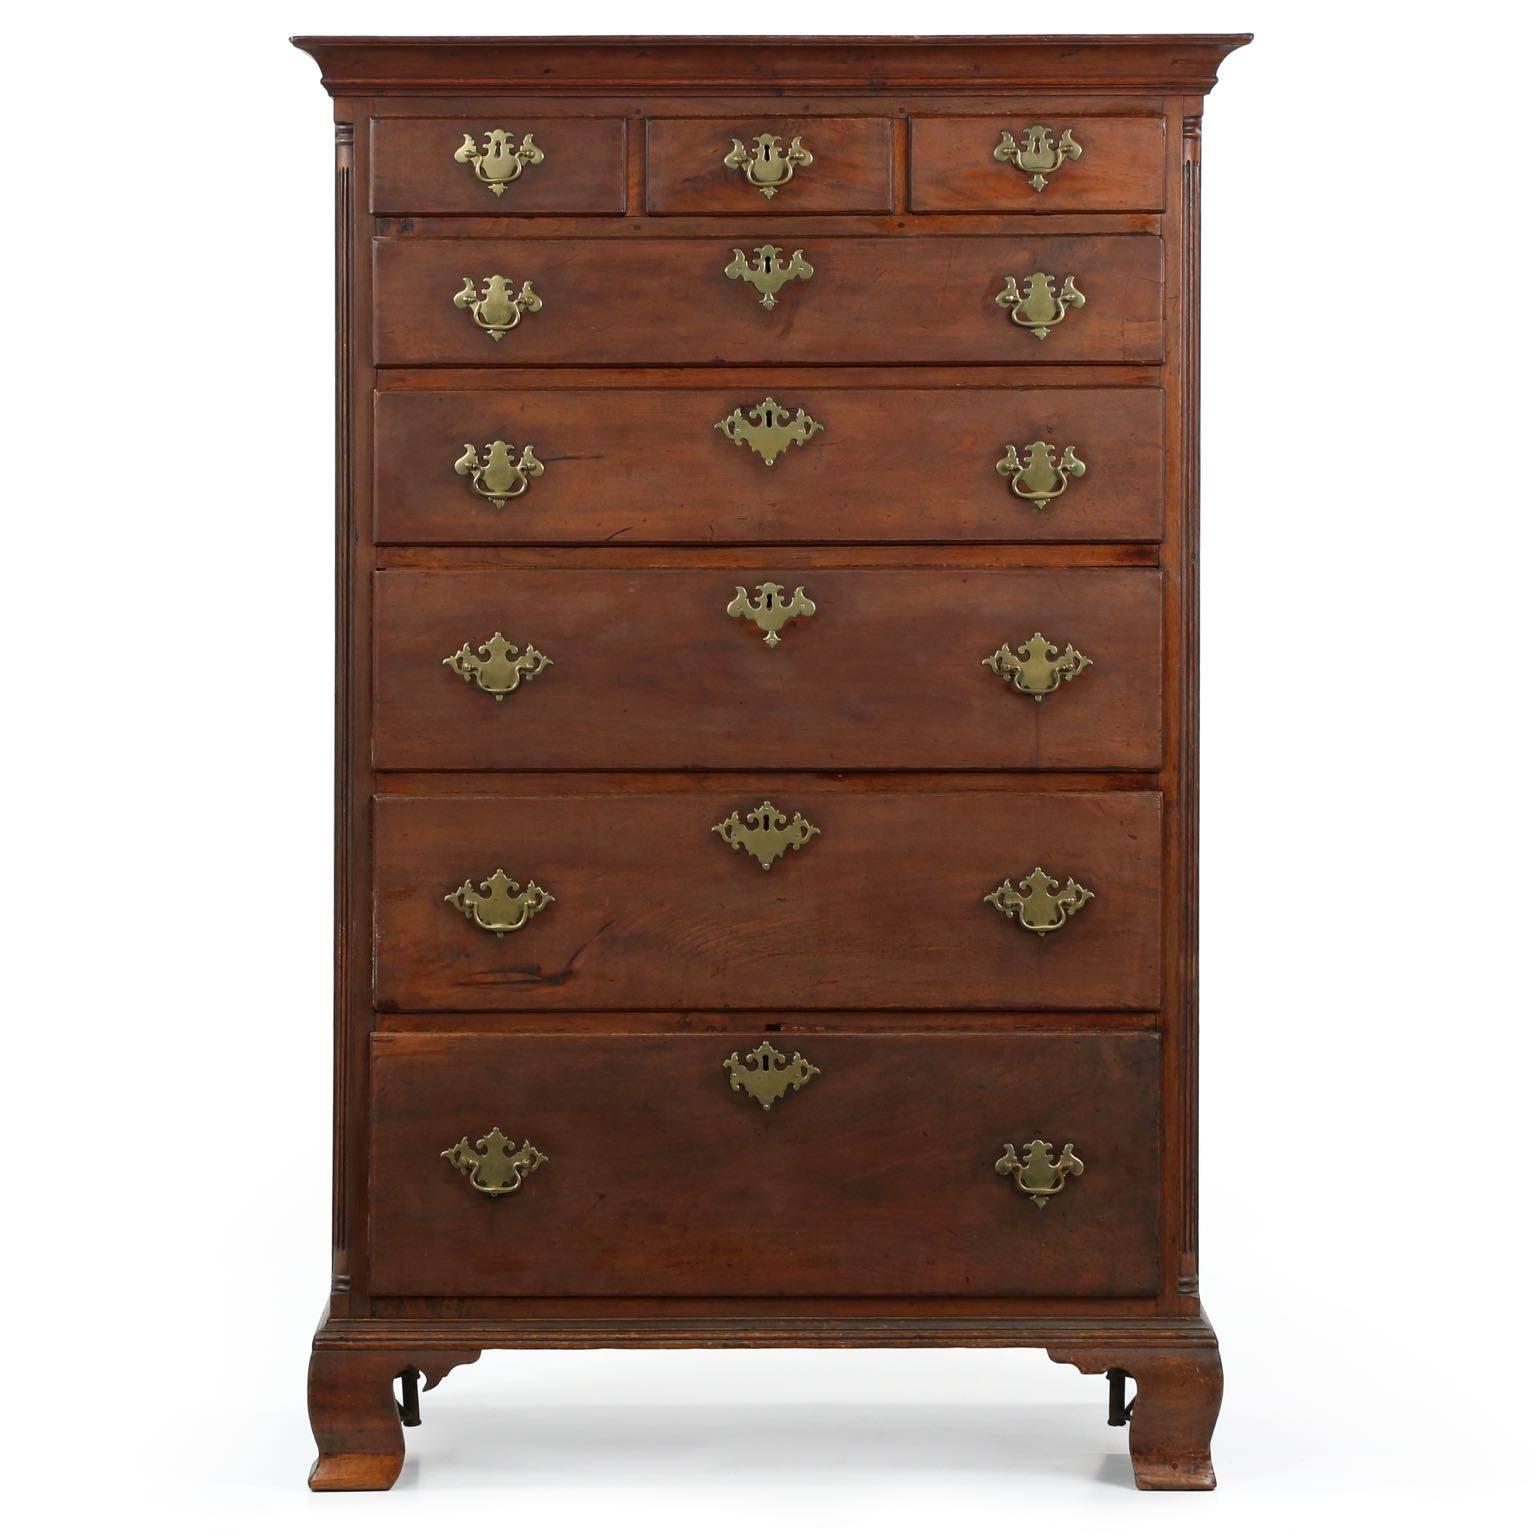 An exceptional survivor remaining in nearly untouched original condition, this very fine American Chippendale tall chest of drawers was crafted in Pennsylvania during the last quarter of the 18th Century.  Probably from the Philadelphia area or of